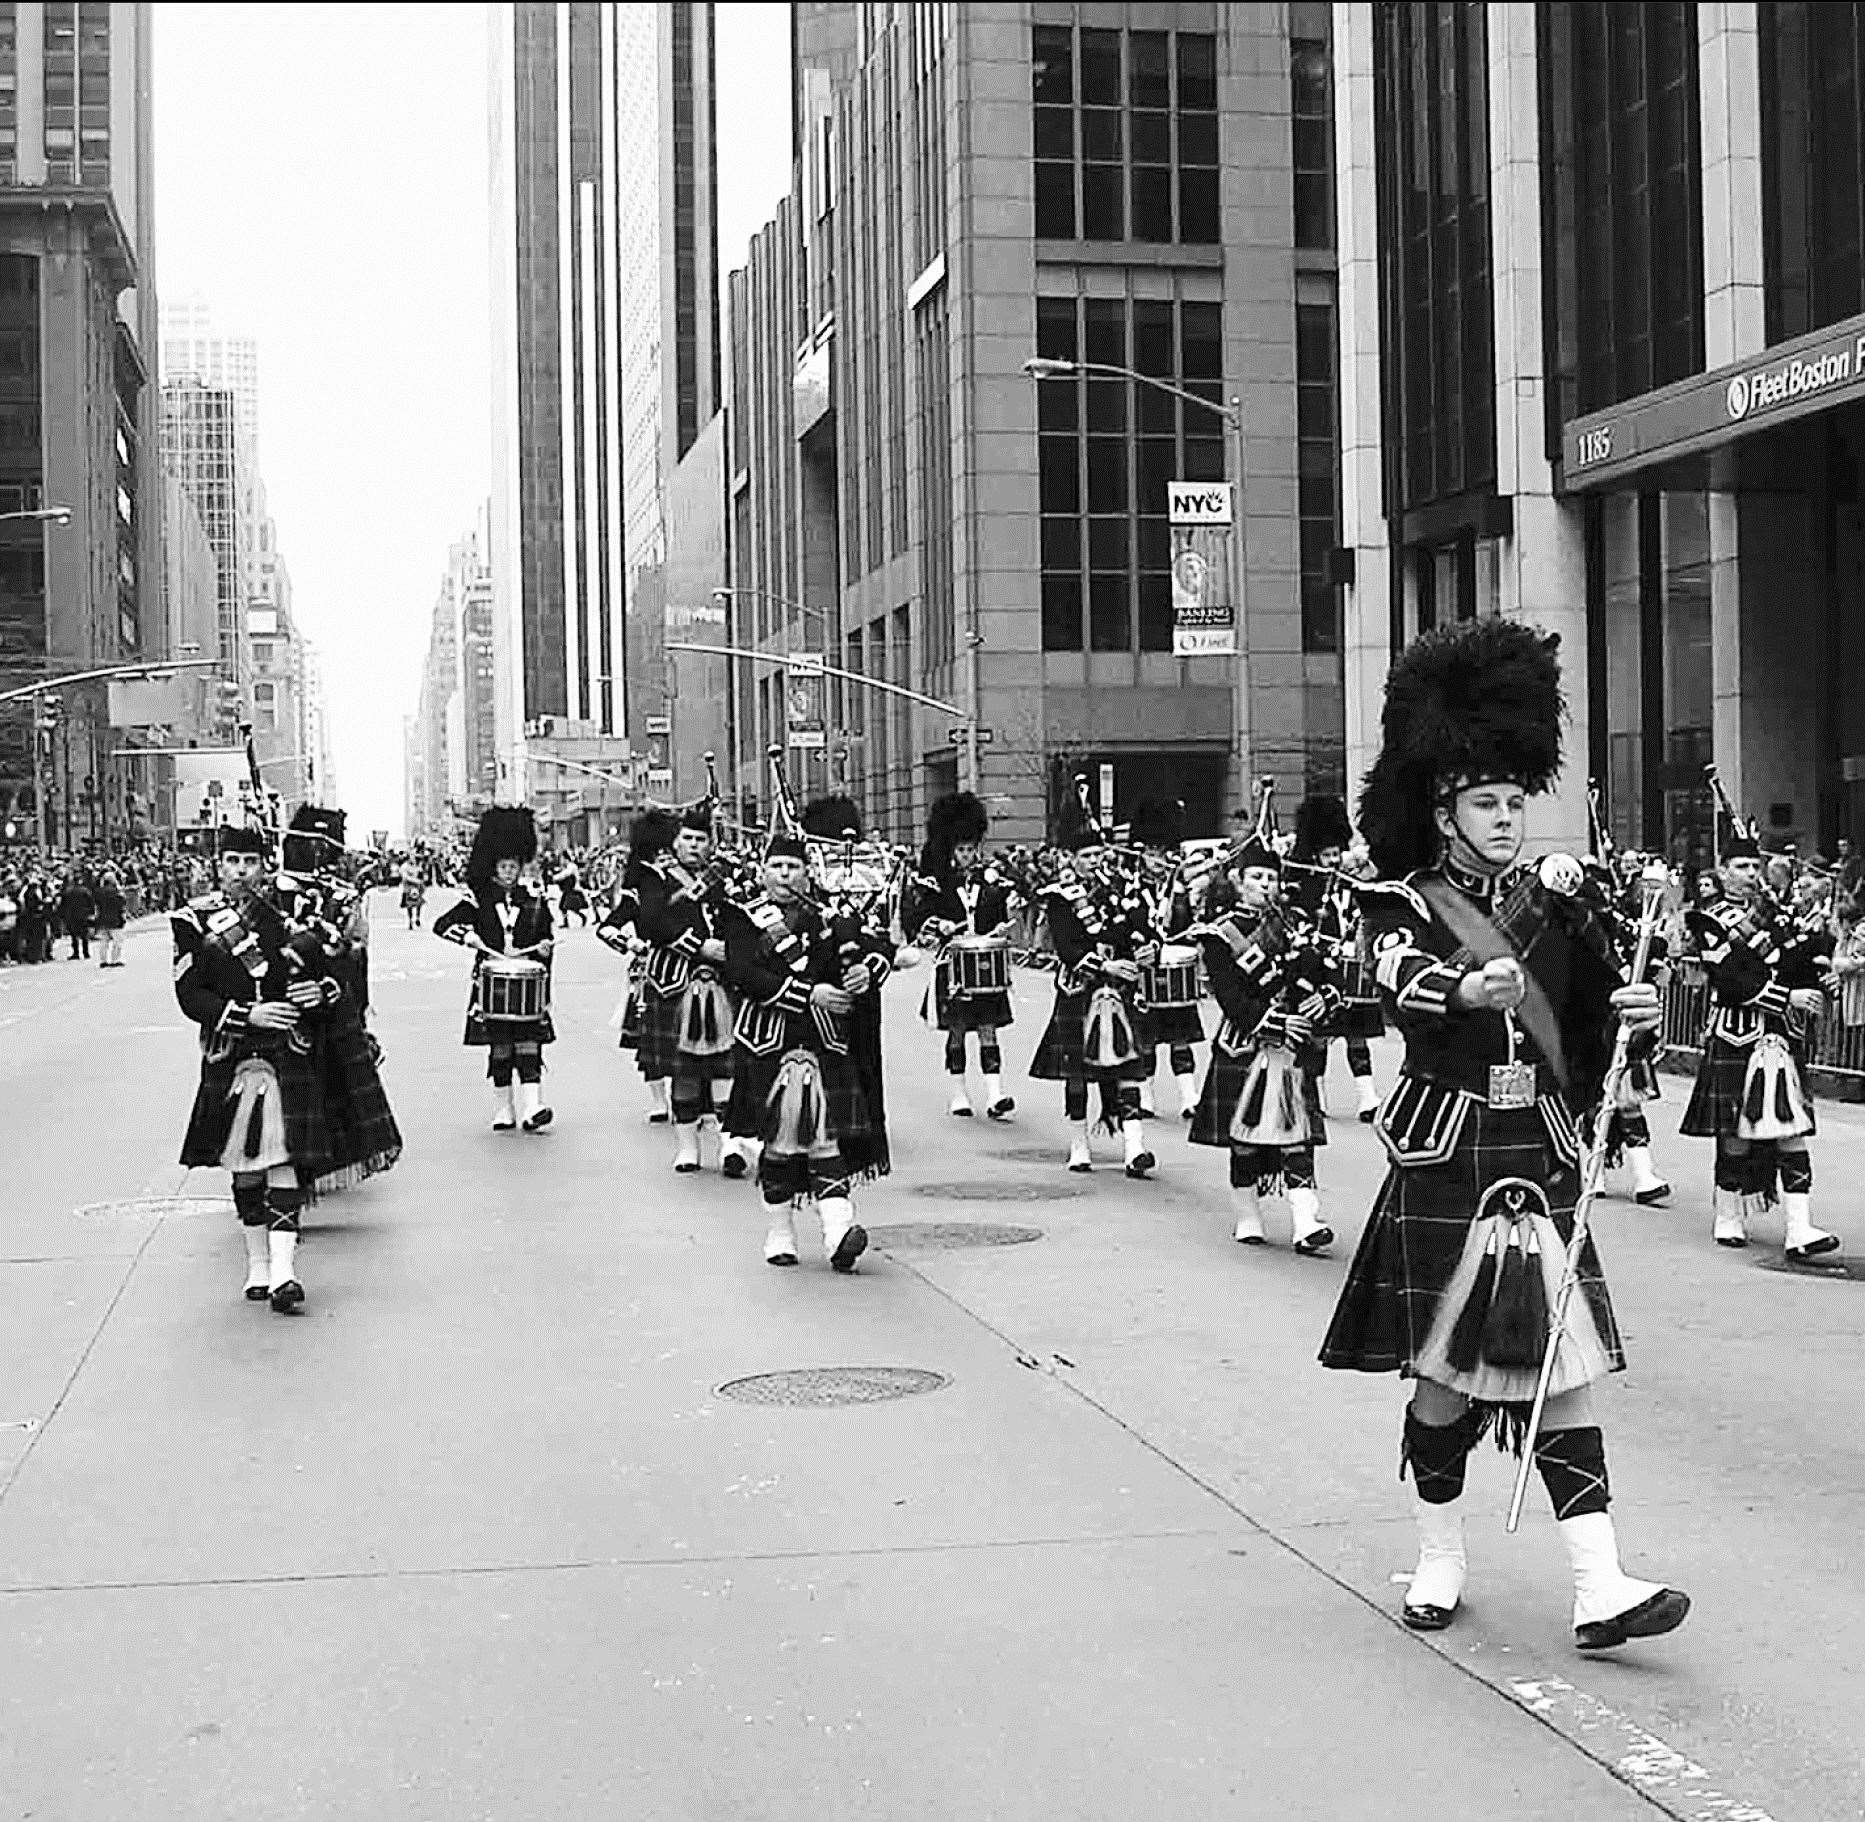 Thurso Pipe Band marching through New York during the city's Tartan Week celebrations in April 2004. The picture was taken by Graham Spence. There were 45 pipe bands in the parade.